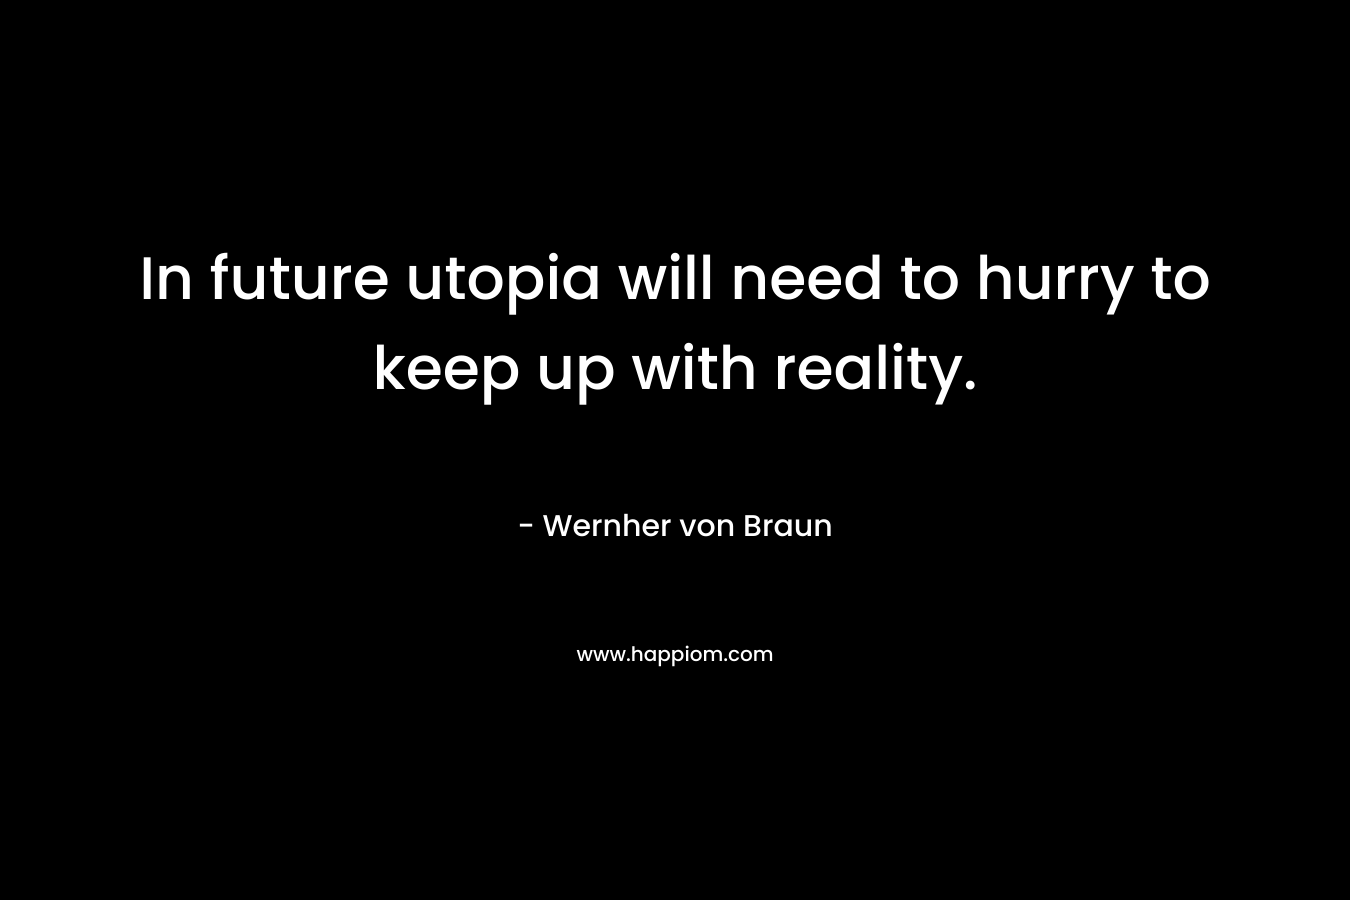 In future utopia will need to hurry to keep up with reality. – Wernher von Braun